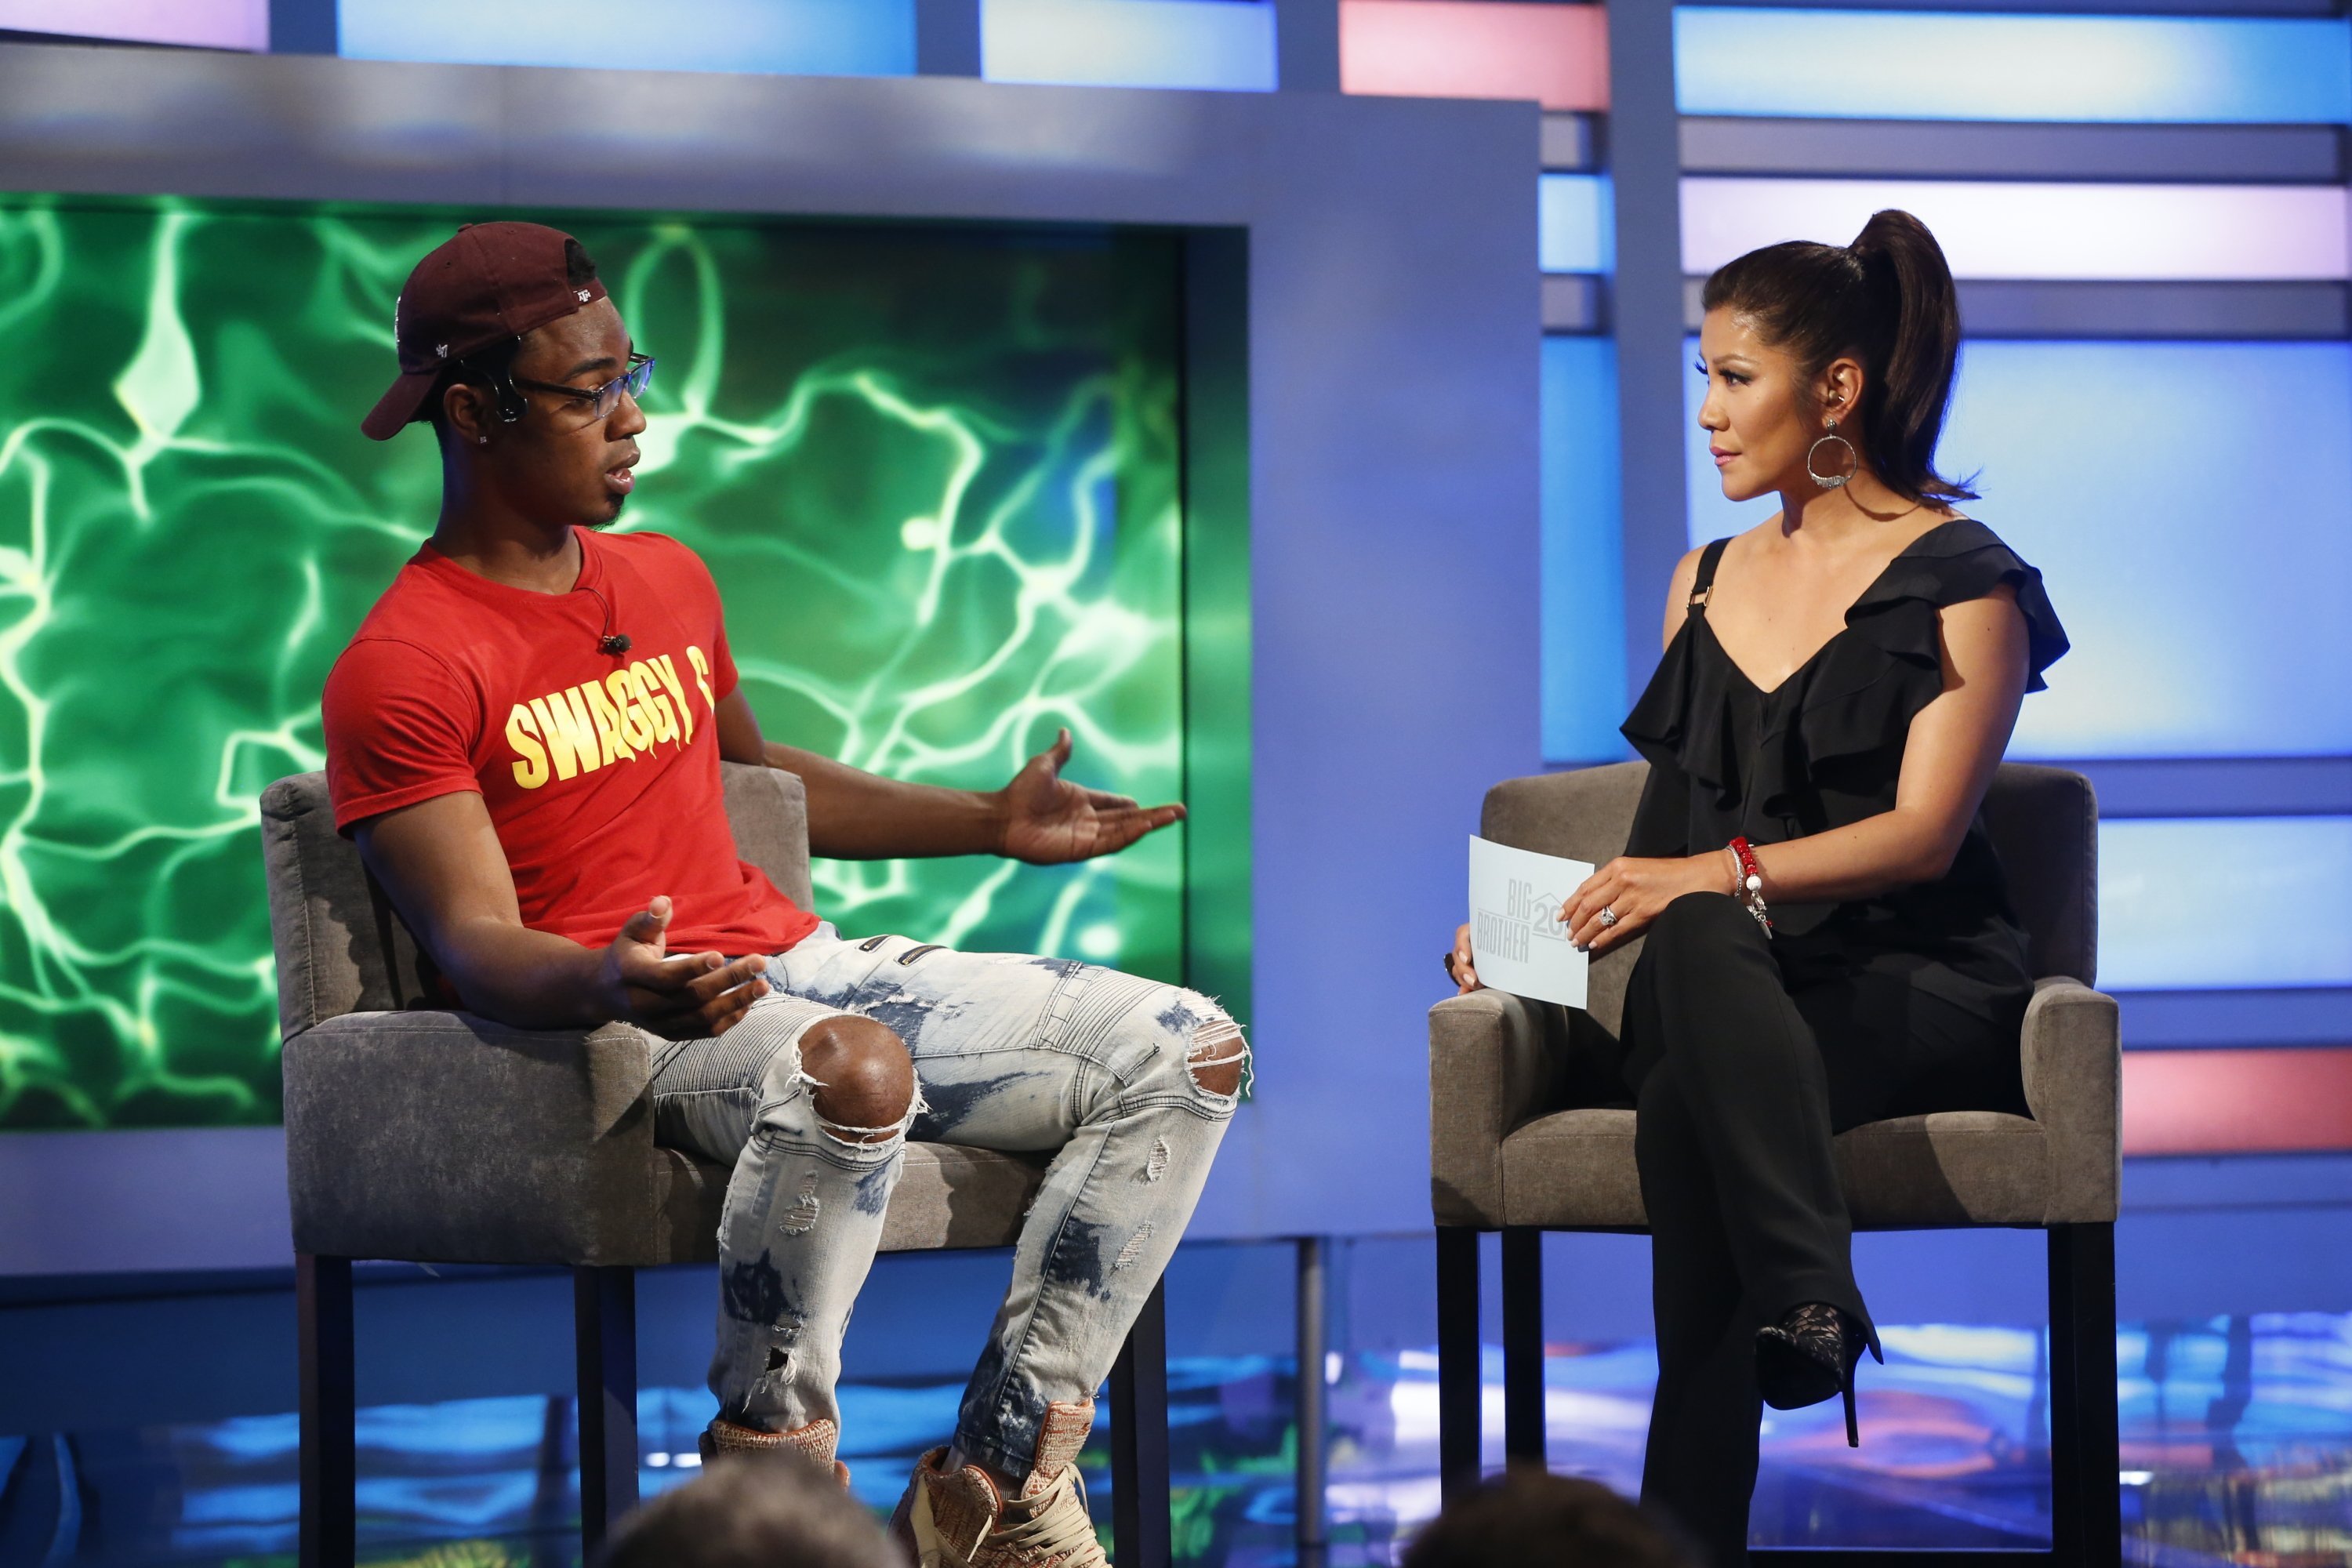 Host Julie Chen interviews Chris Williams, the second houseguest to be evicted from the Big Brother house